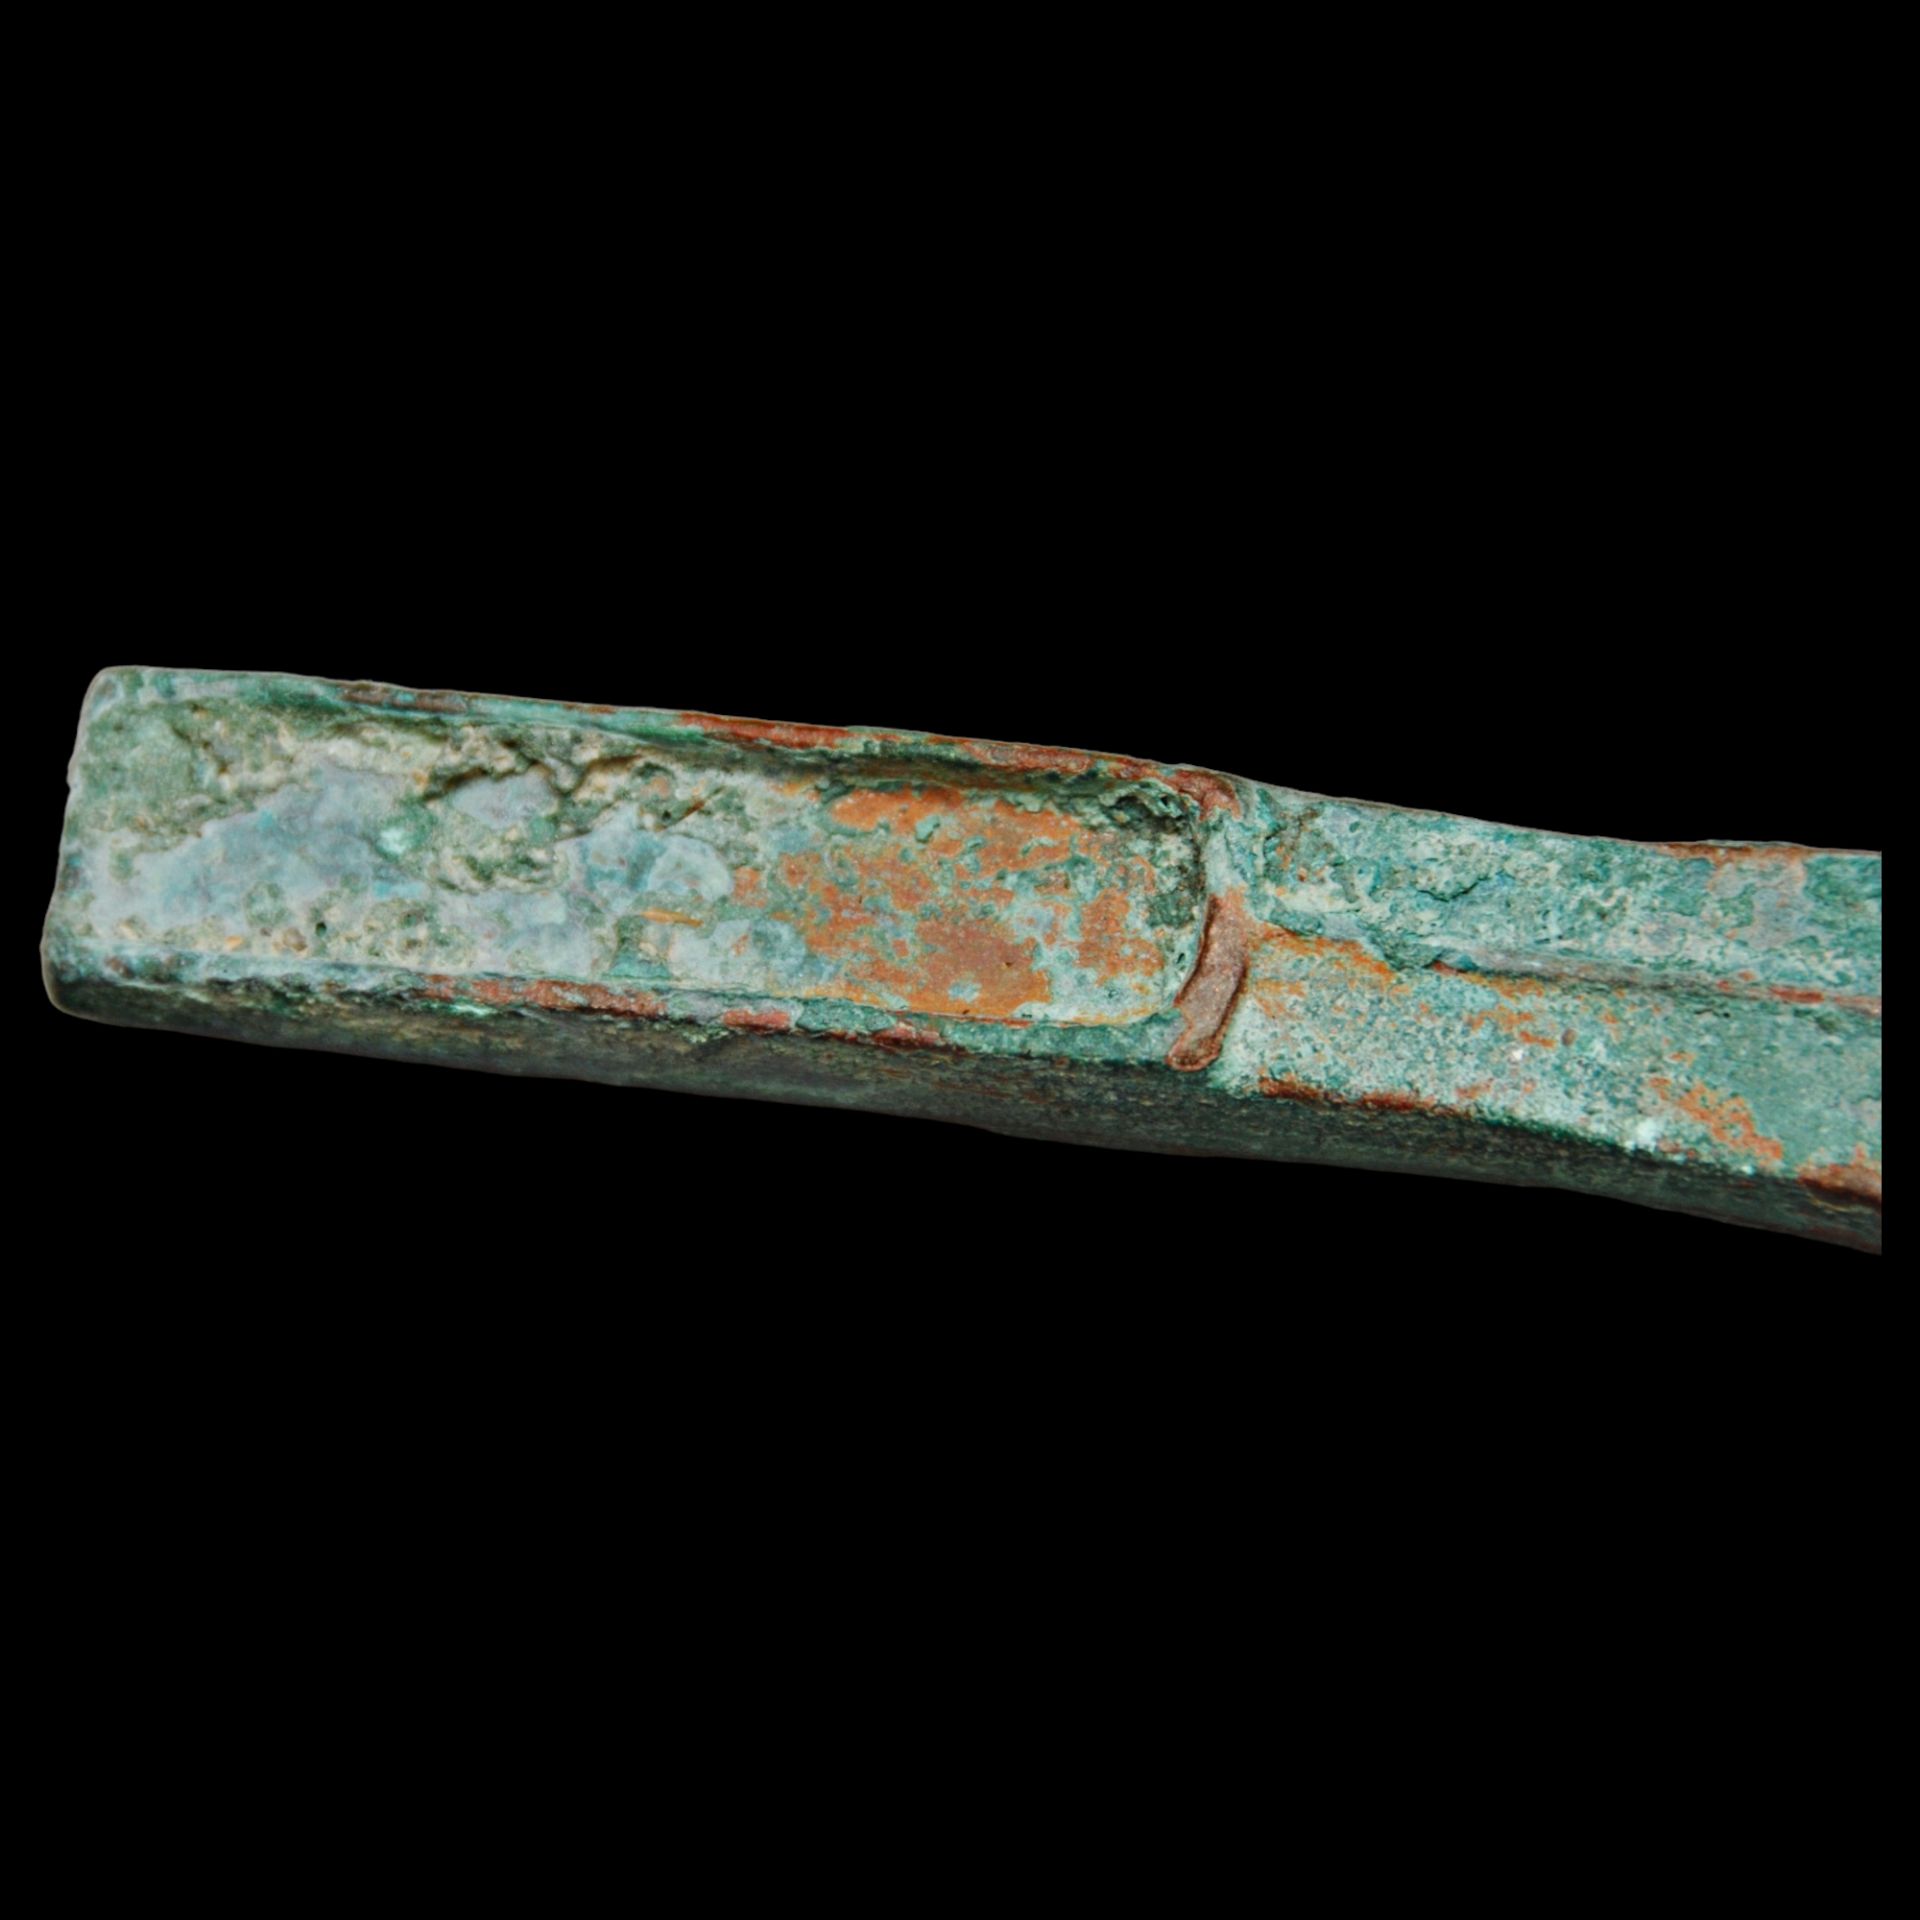 Two bronze axes, type Palstave 1500-1400 BCE. - Image 7 of 7